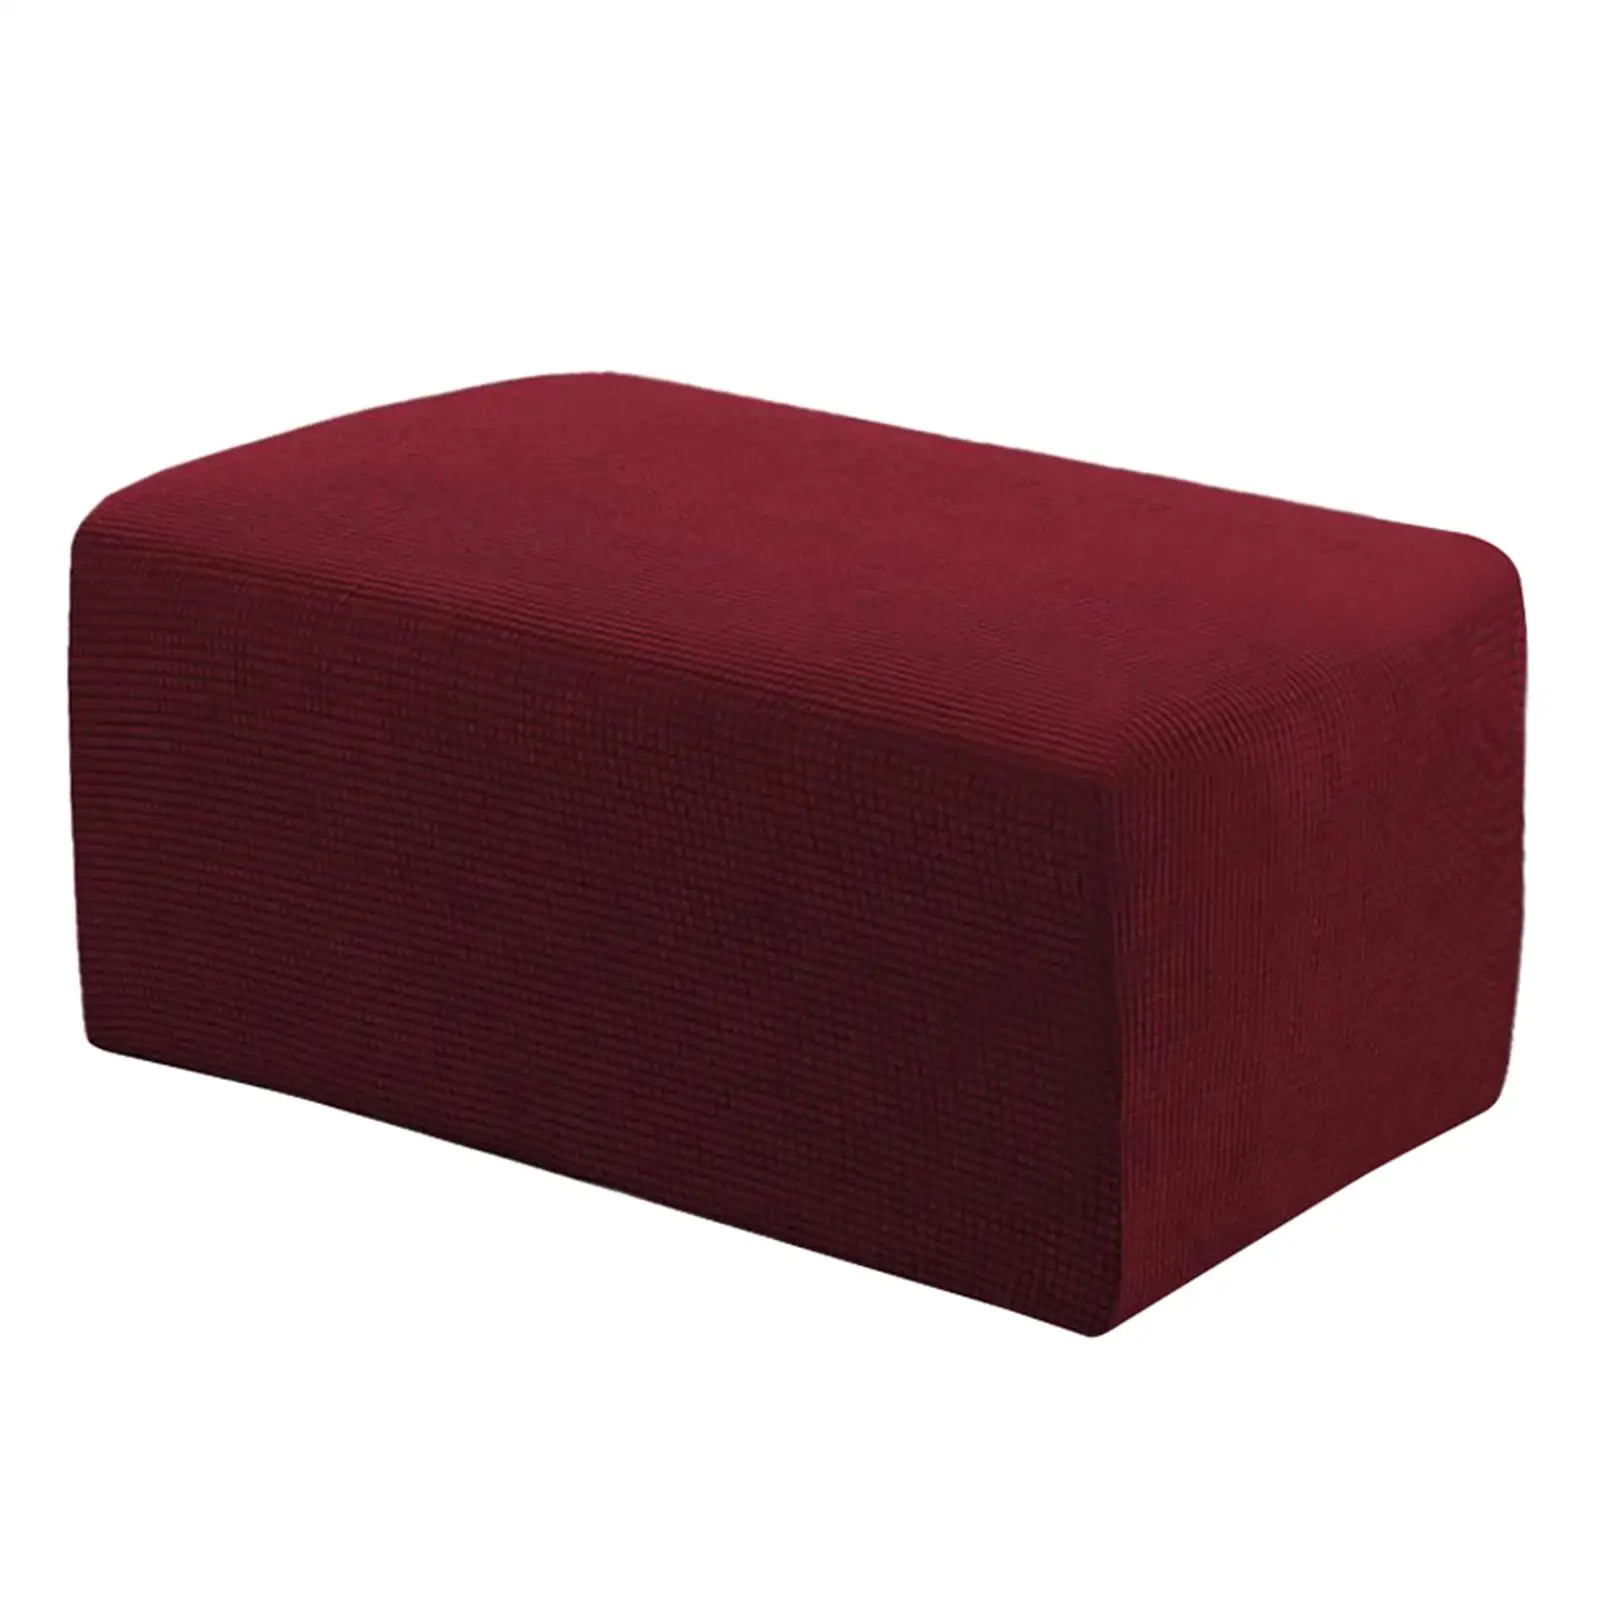 Footstool Cover Ottoman Slipcovers Folding Pouf Small Chair Sofa Guard